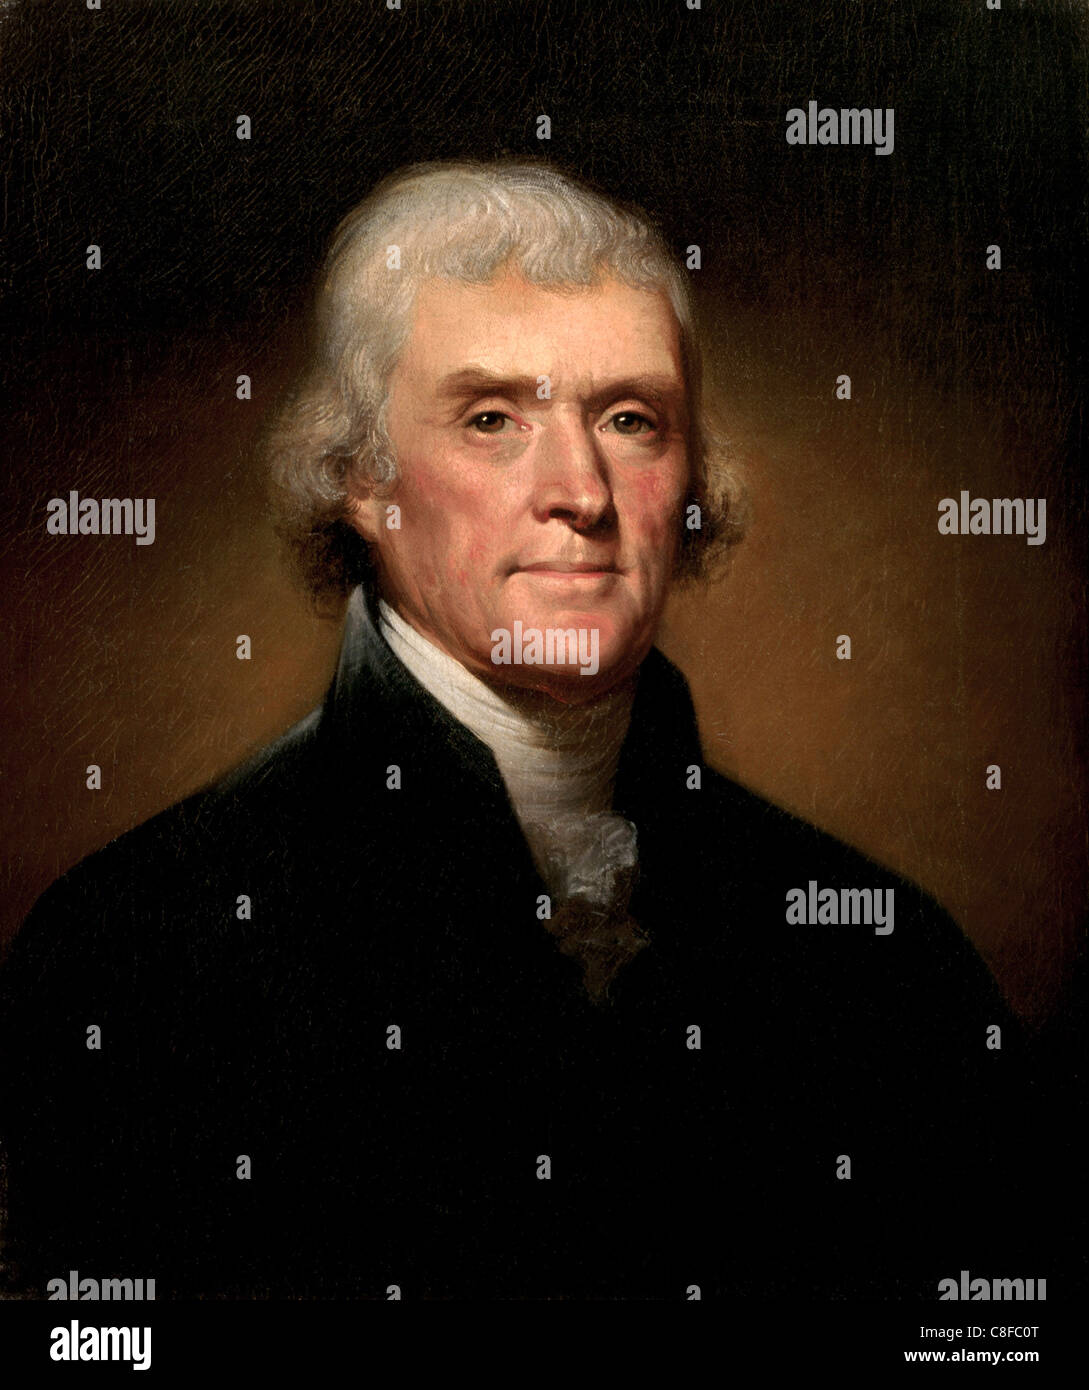 Thomas Jefferson Declaration of Independence author and third president of the United States Stock Photo